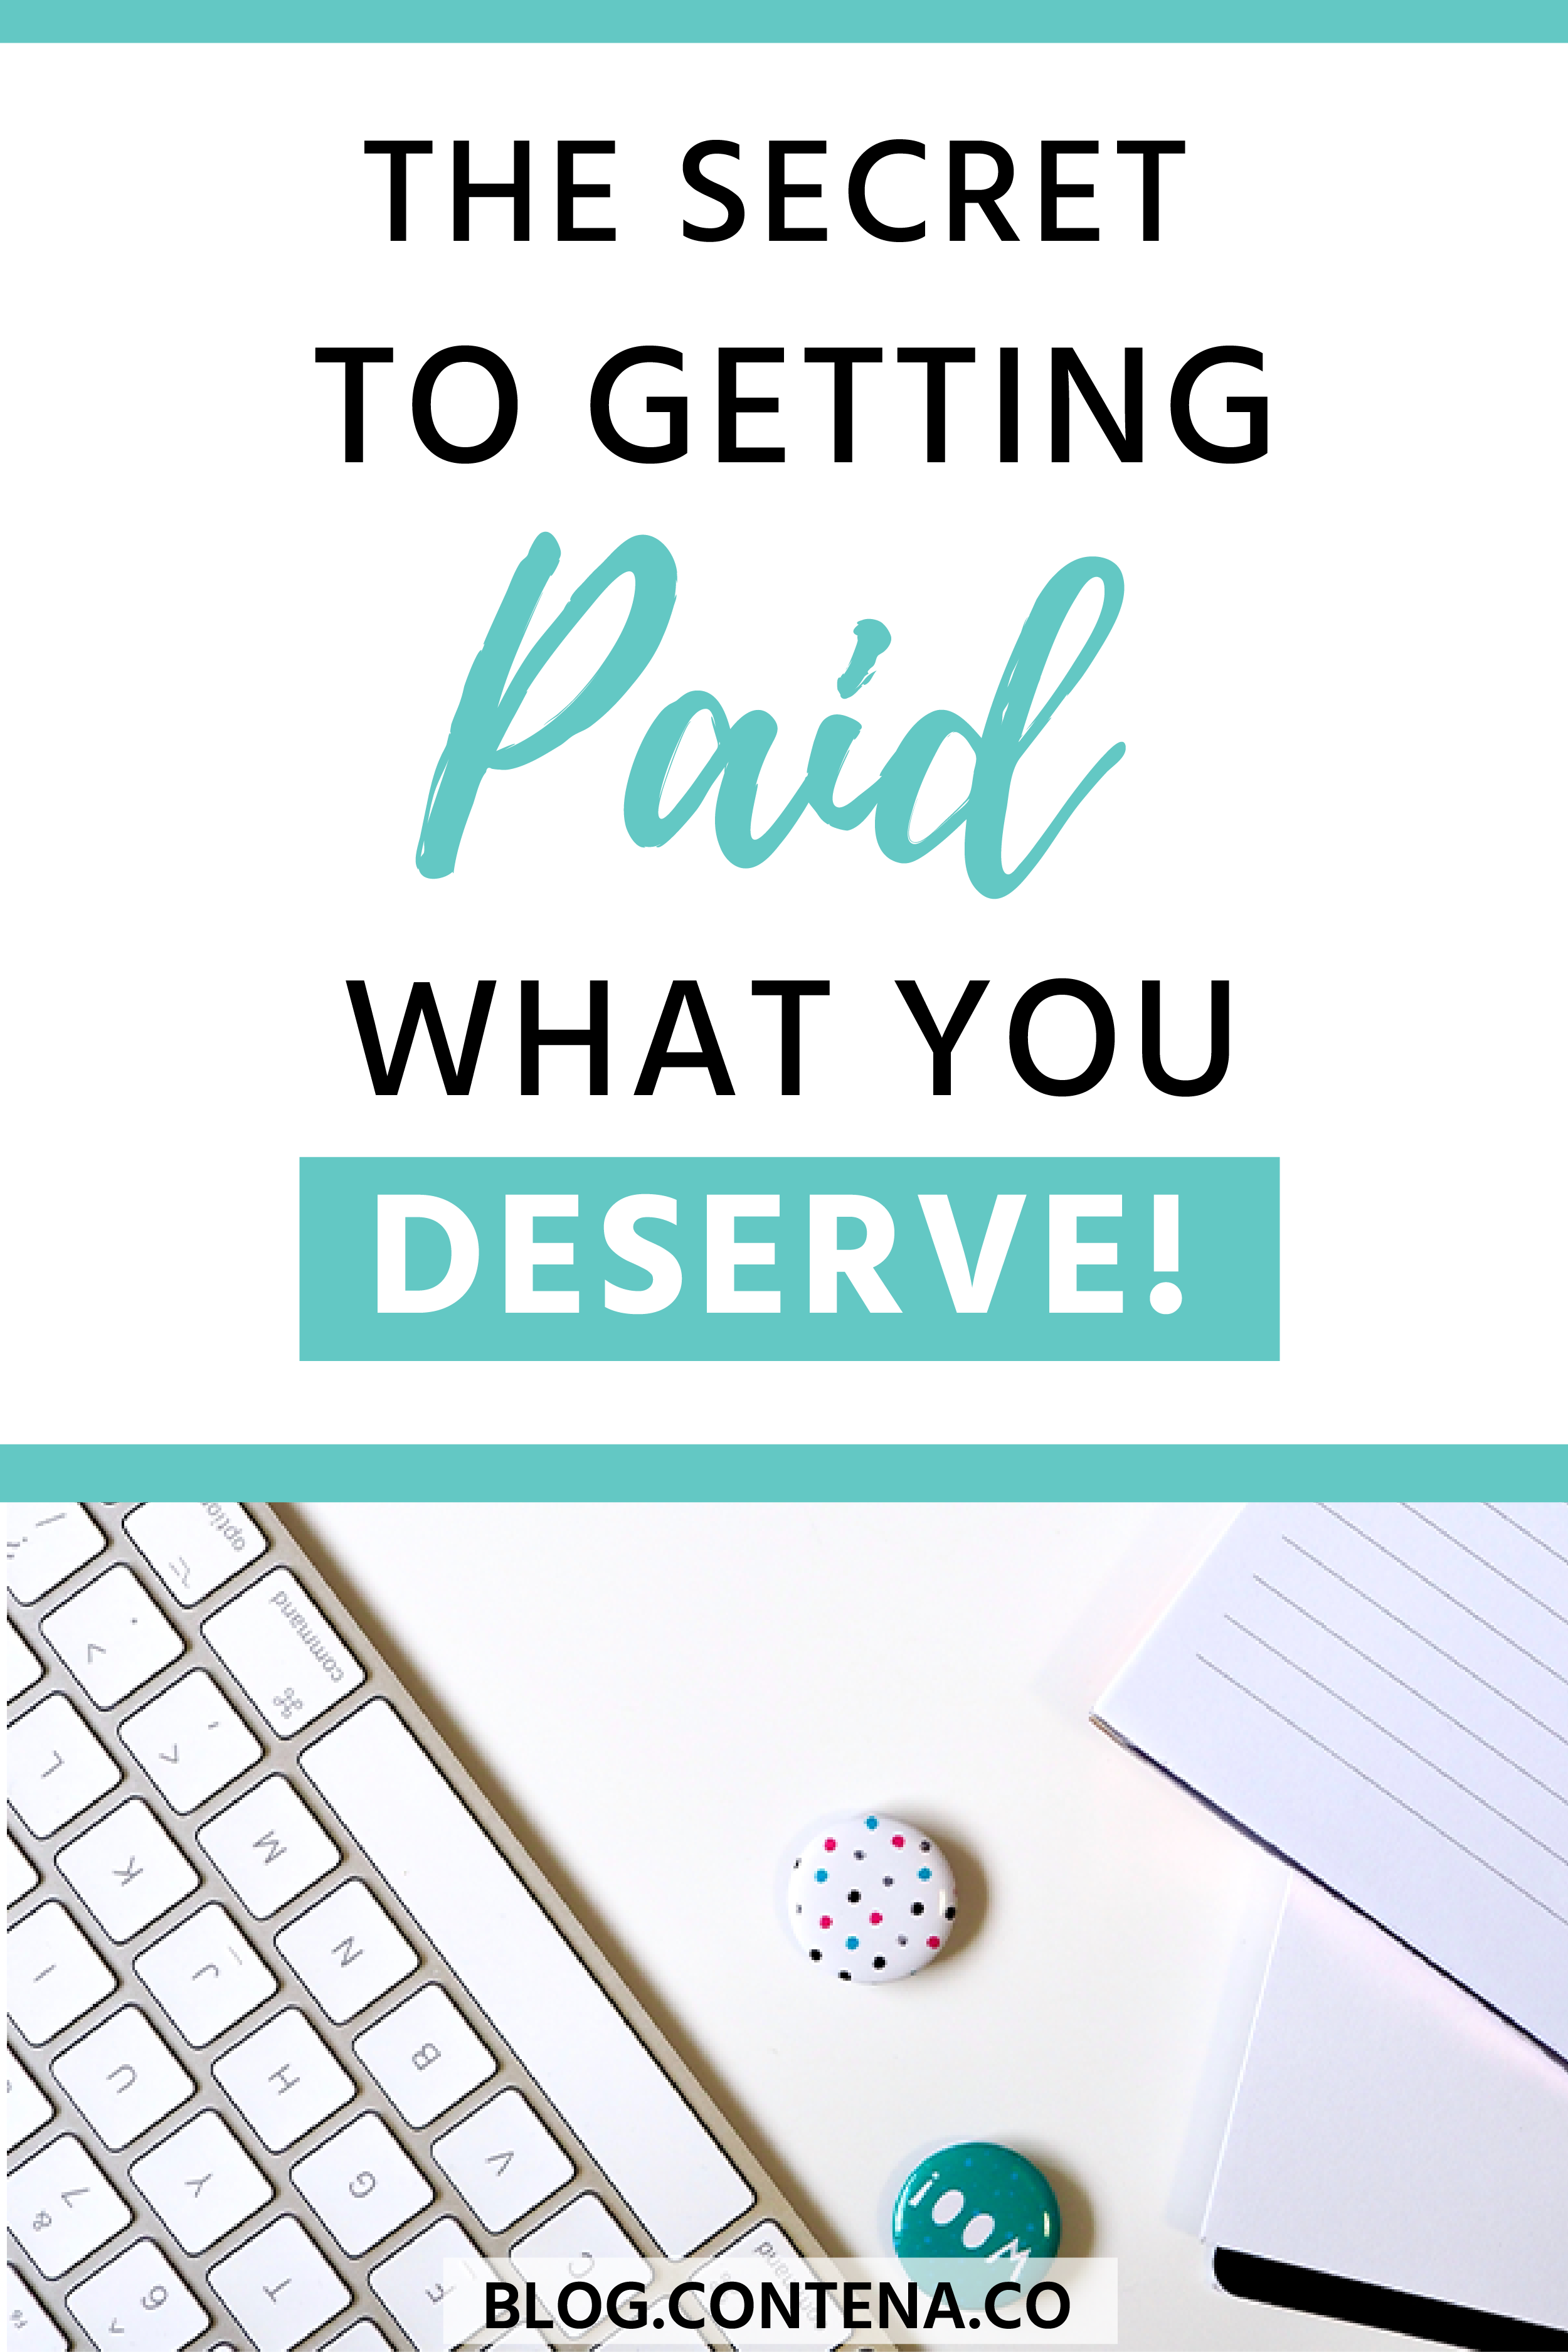 If you’re a freelance writer, you want to get paid! Making the money you deserve is so important as a freelancer, so we’ve got the tips you need to make the money you want in your freelance writing gigs. #Money #FreelanceWriting #Freelancer #WorkFromHome #SideHustle #Money #OnlineBusiness #Writing #WritingJobs #Money